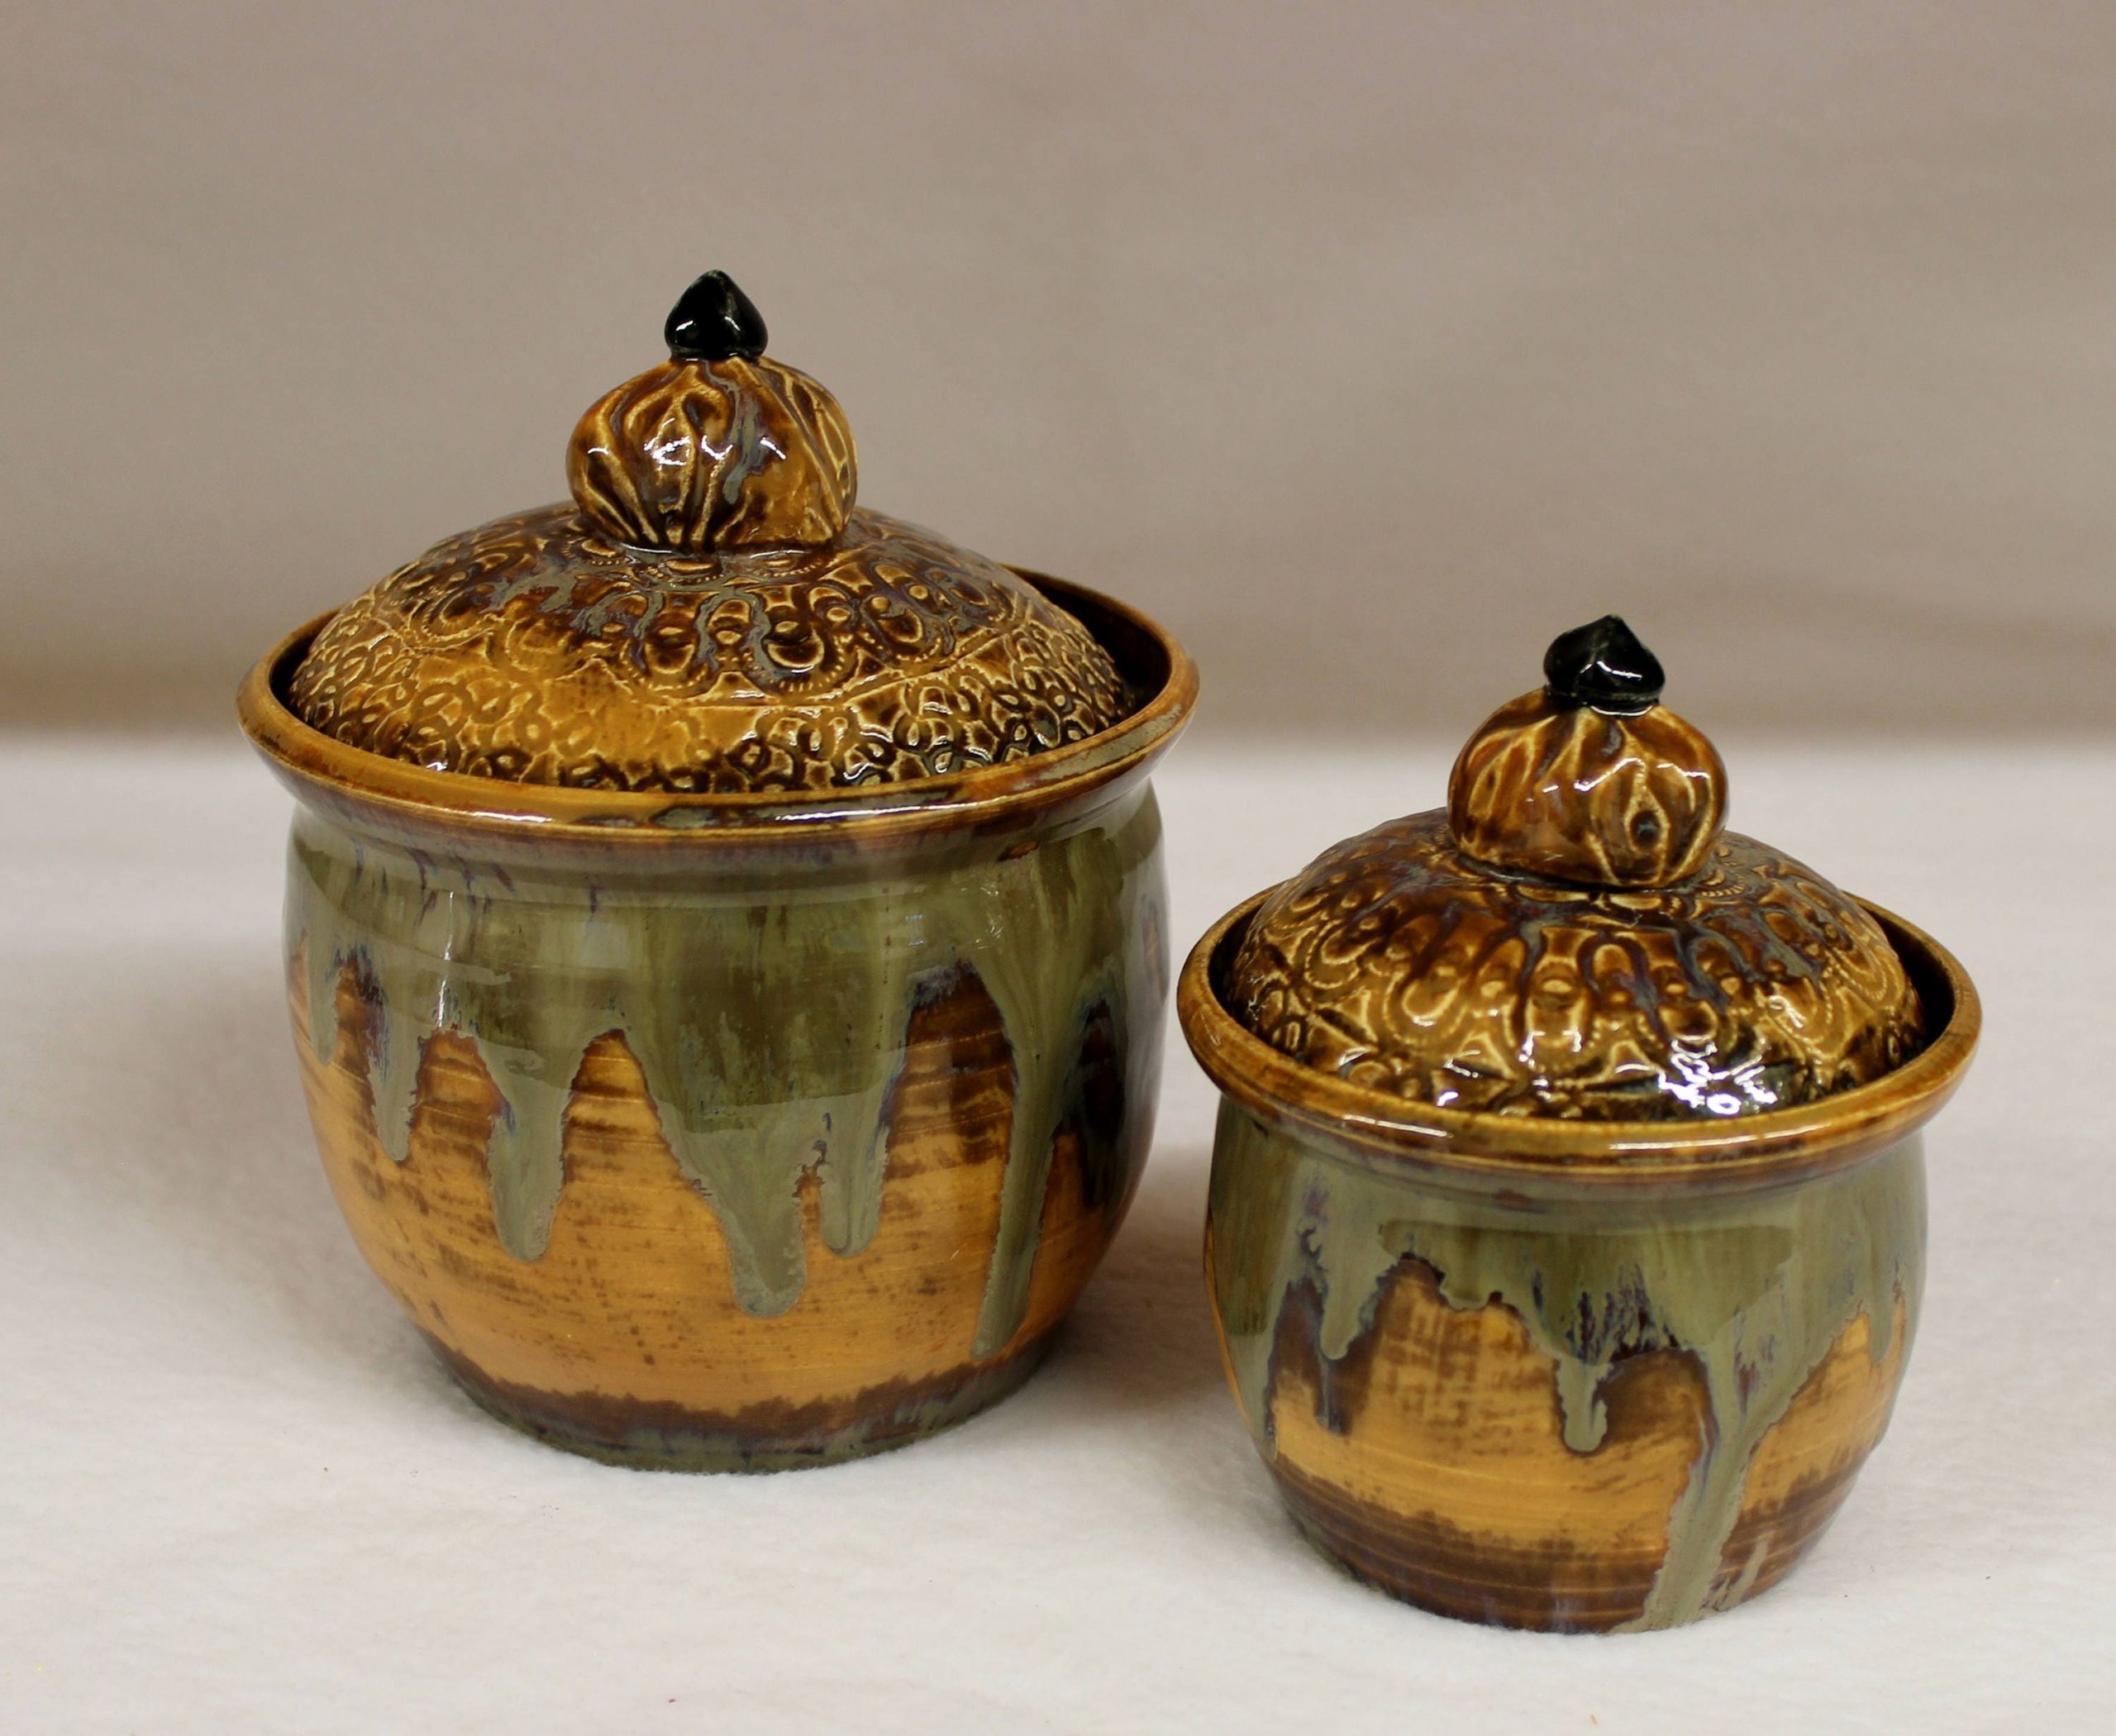 Golden Lace Compact Canister Set Handmade Ceramic Storage serapportantà Ceramic Kitchen Canisters 